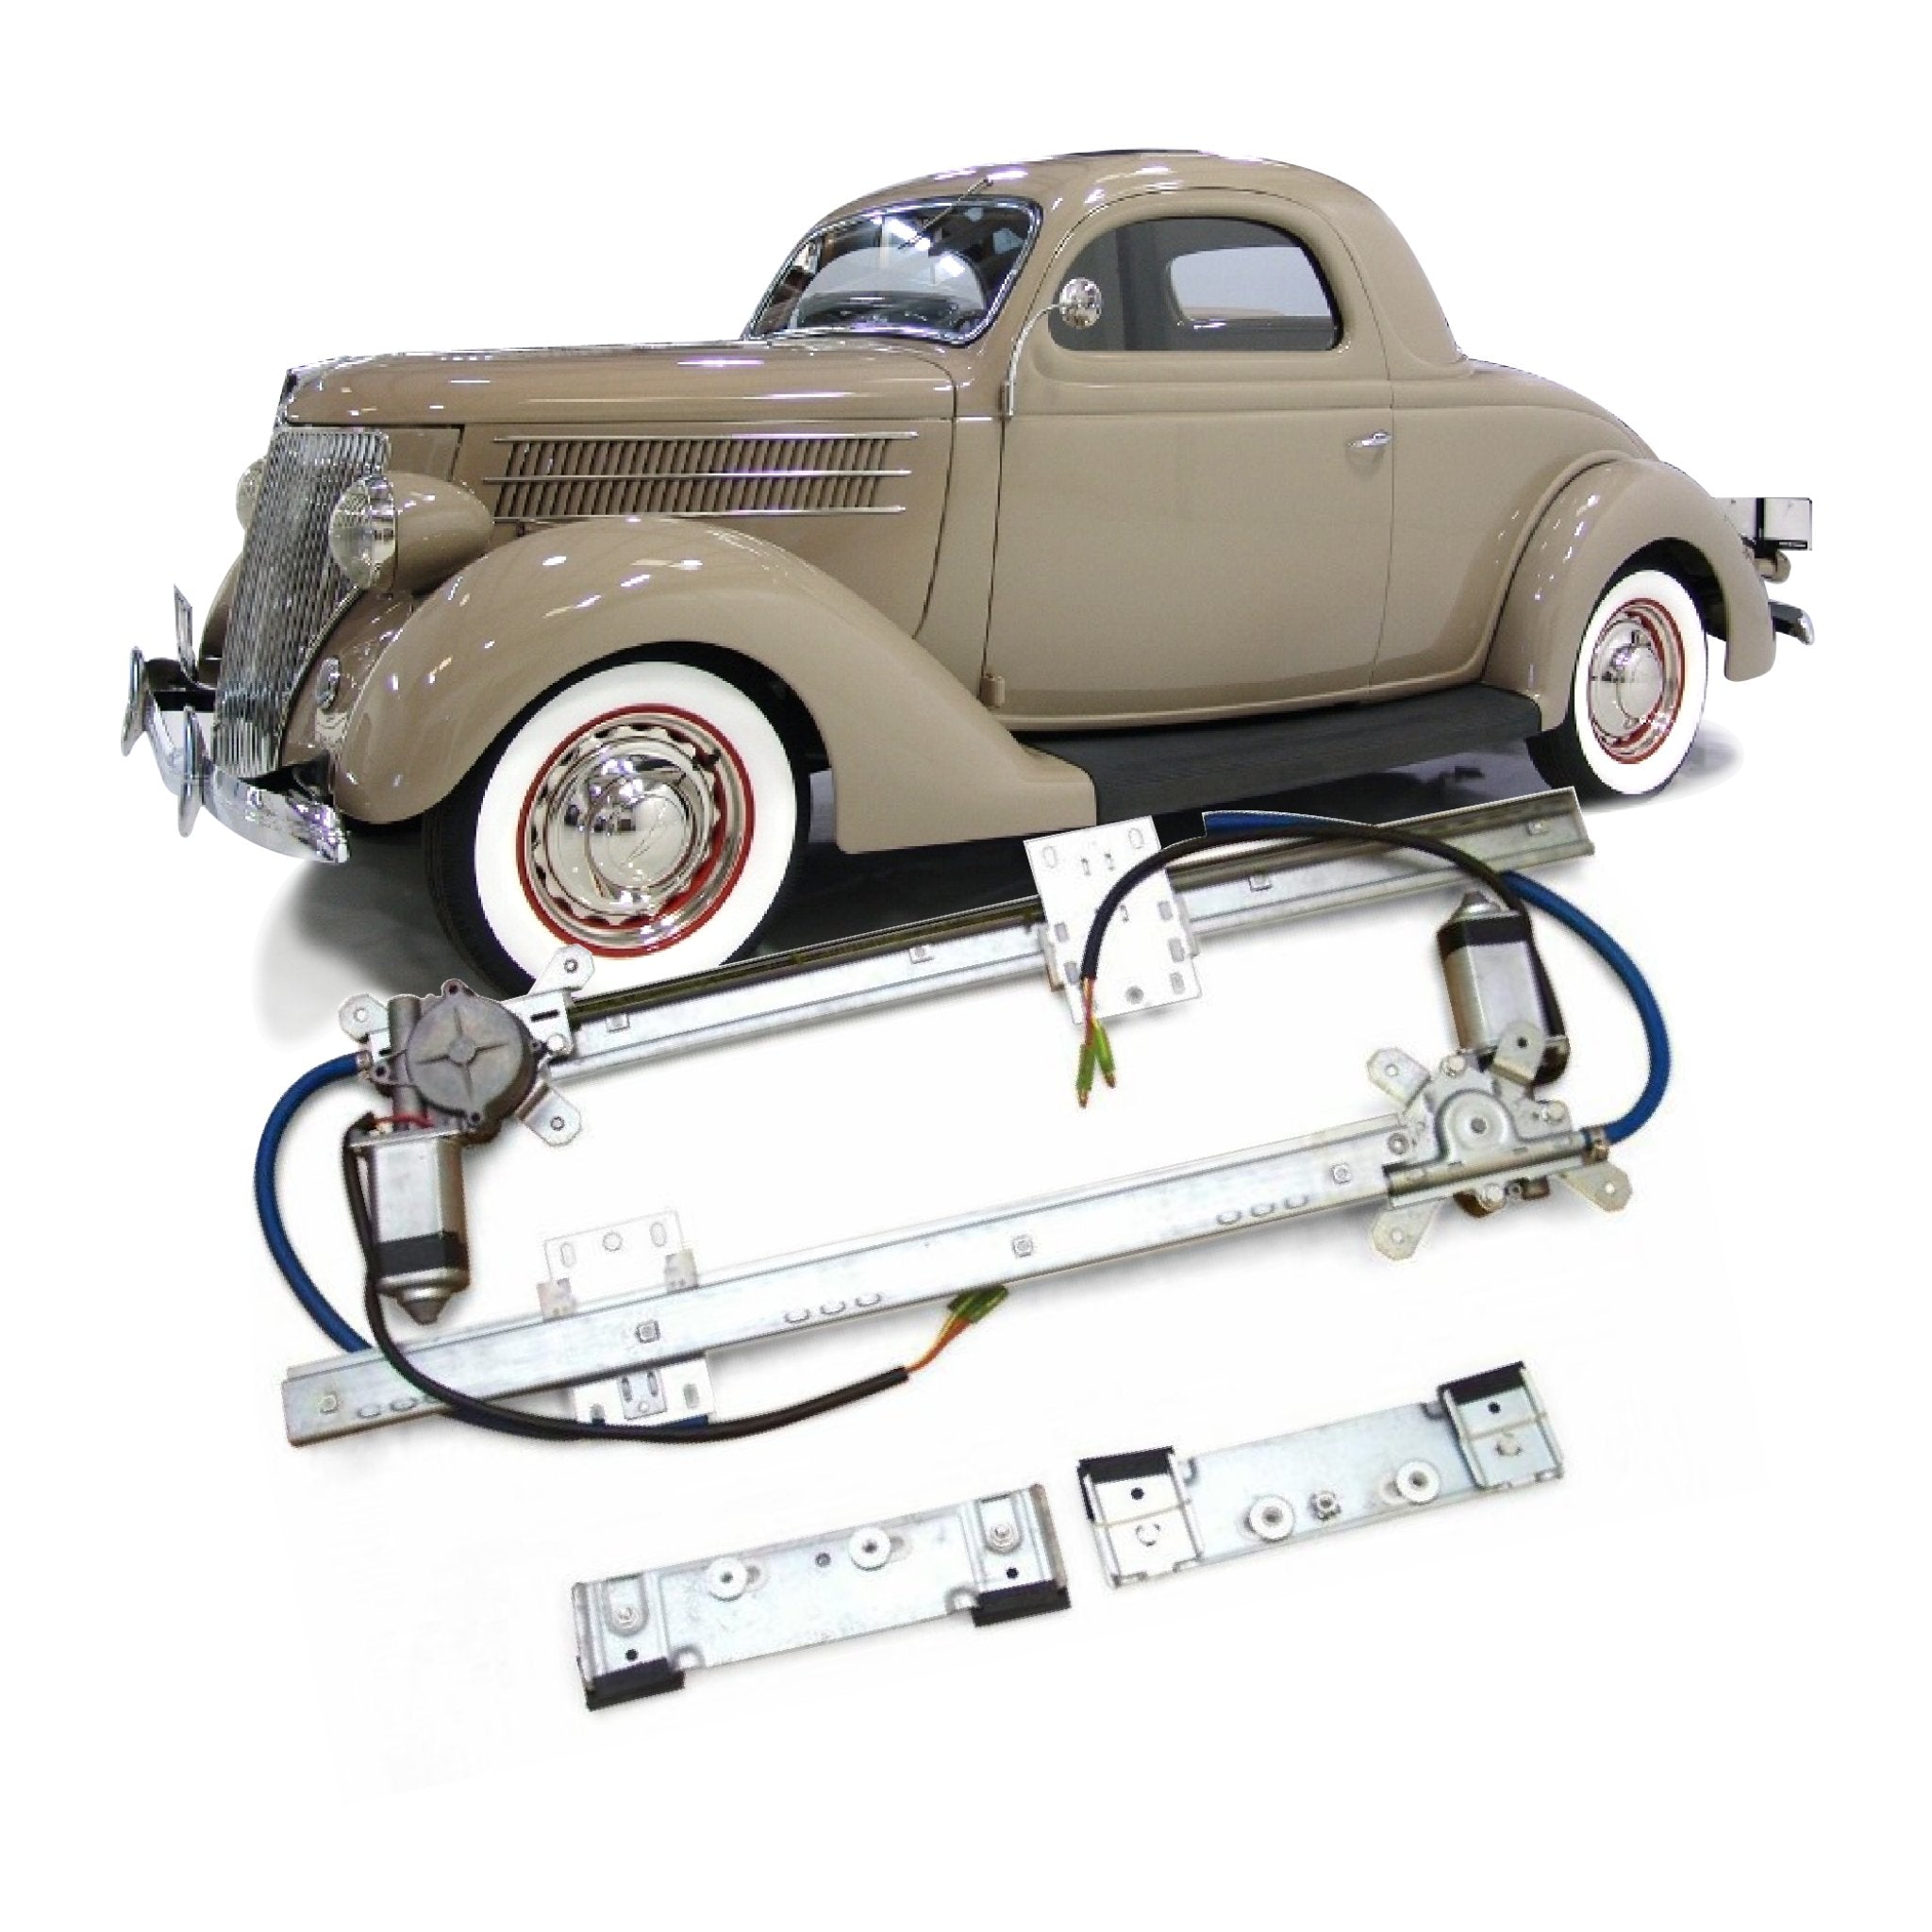 Power Window Kit for 1936 Ford Model 48 Coupe Club Standard Deluxe or 3-window